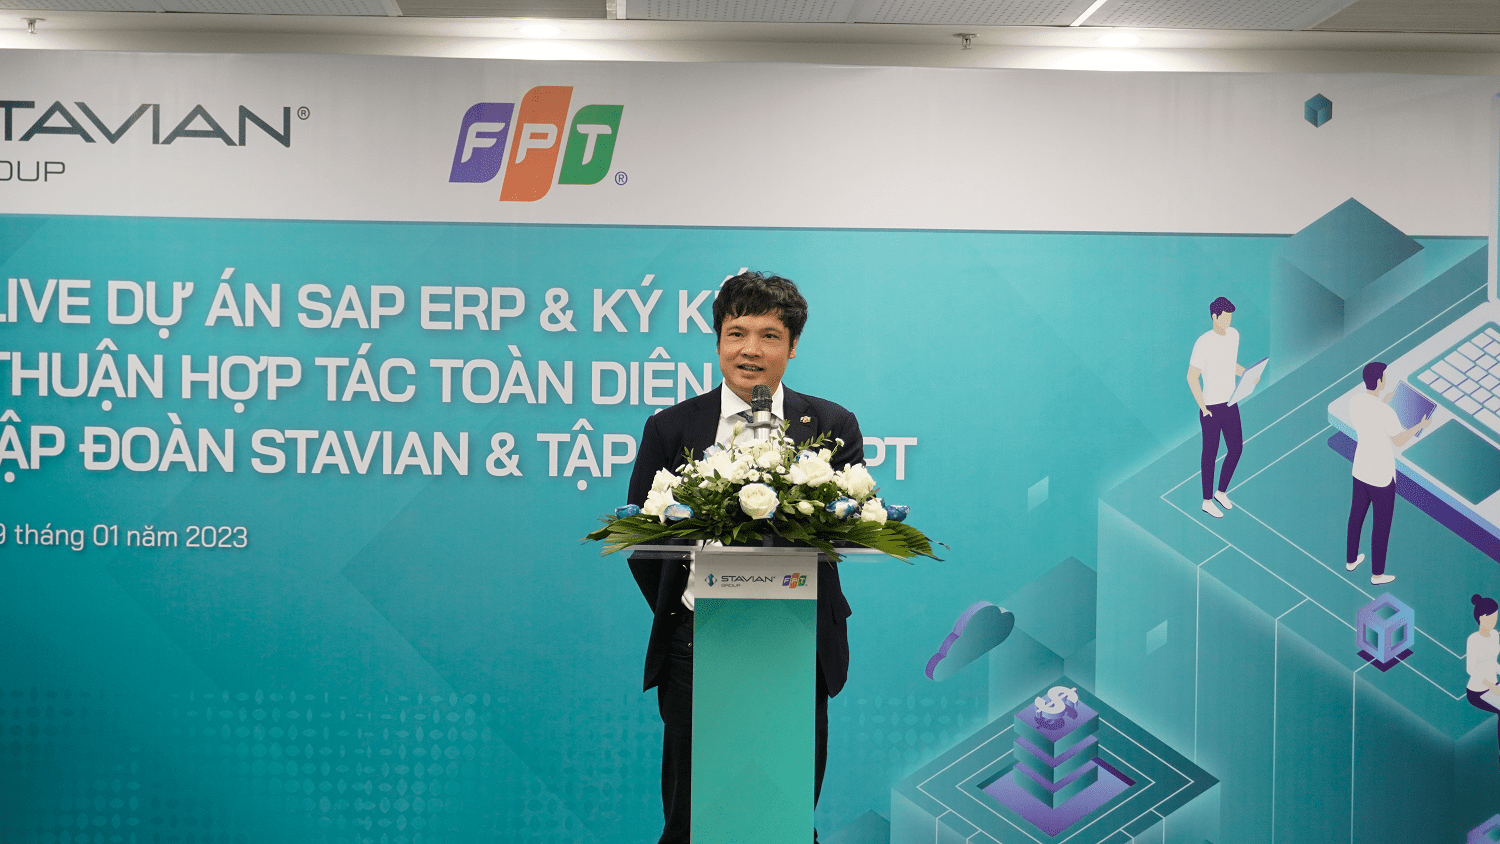 Mr. Nguyen Van Khoa - CEO of FPT Corporation - agreed that the partnership between the two companies would boost the digitization process for Stavian.